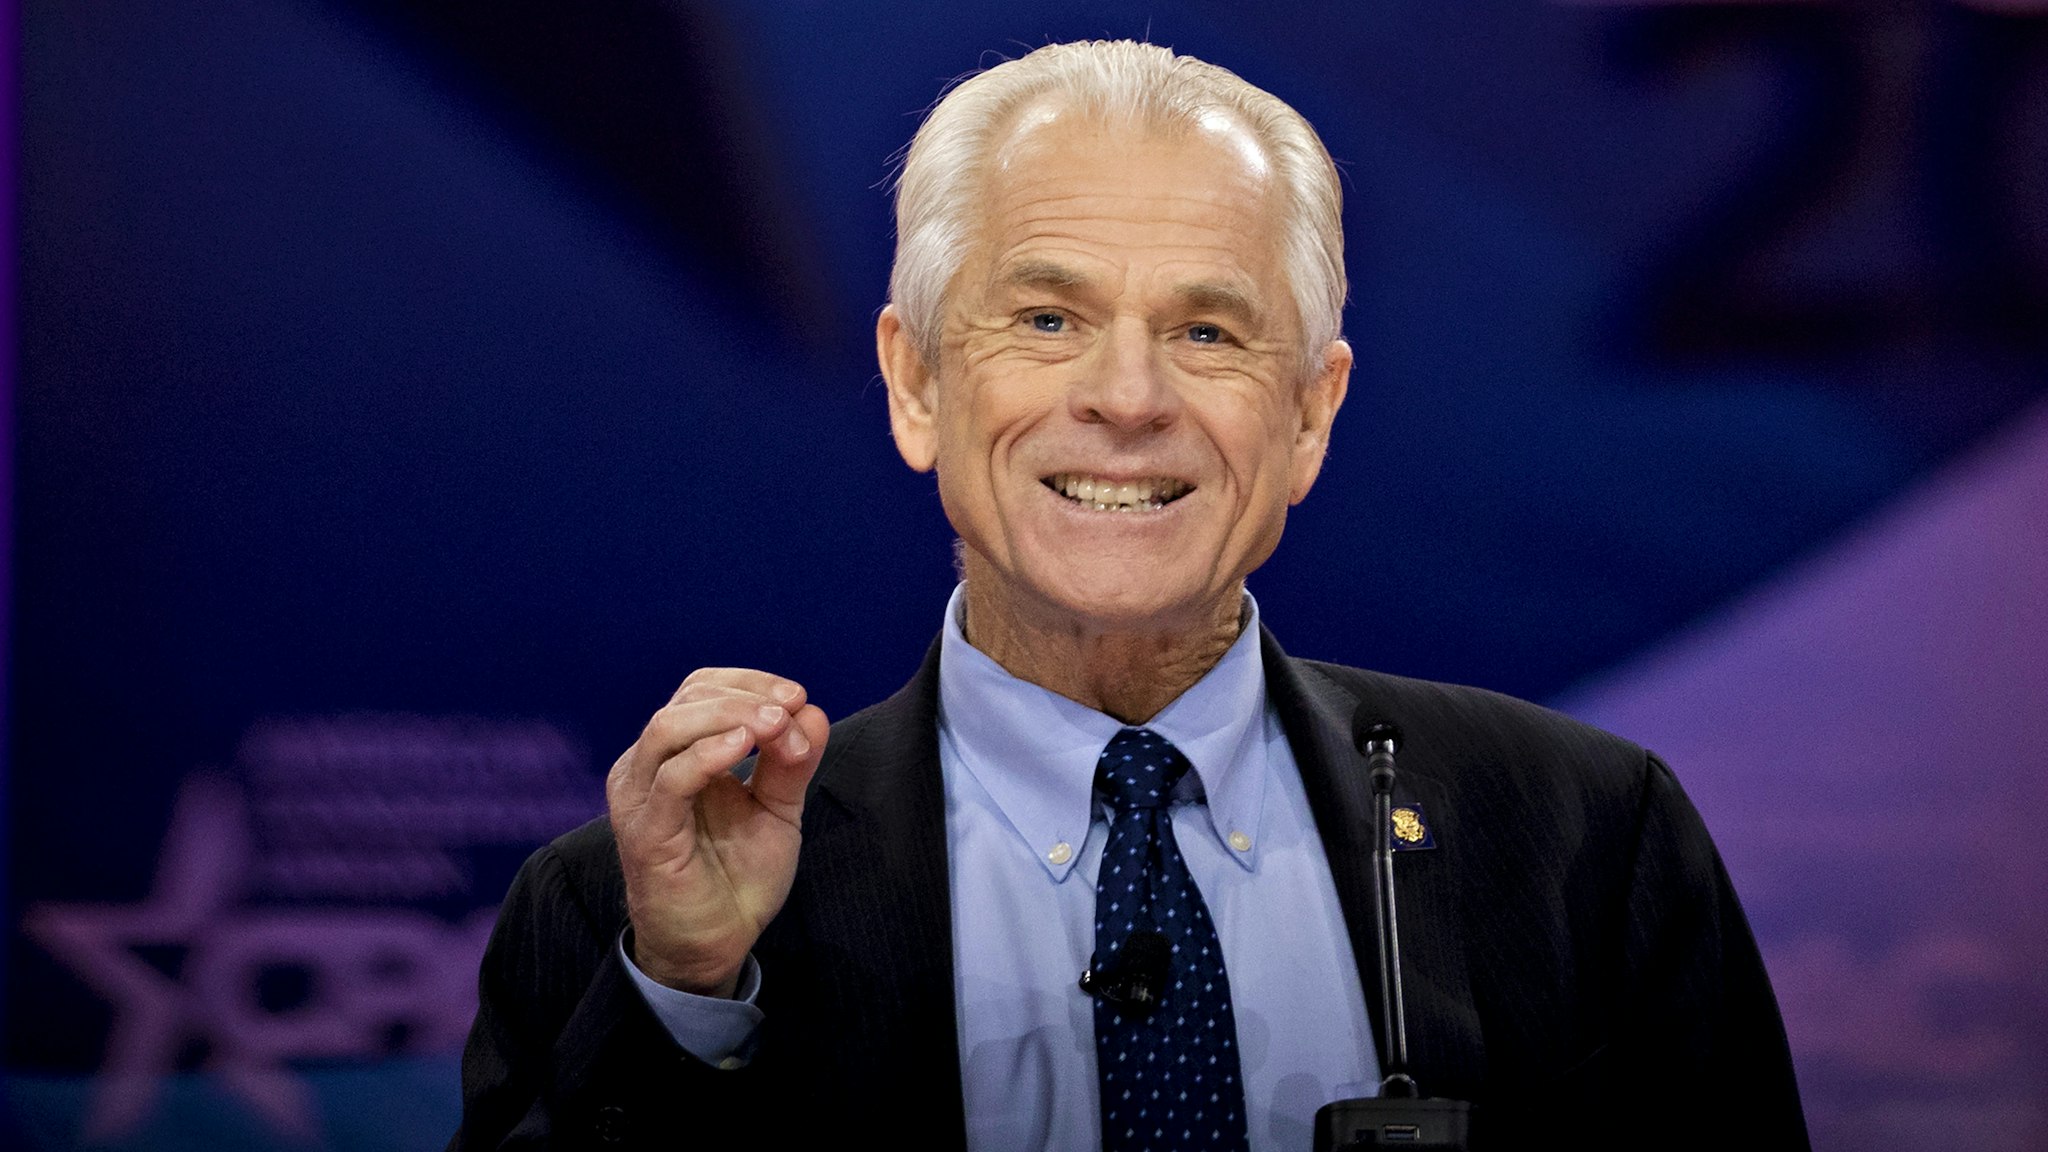 Peter Navarro, director of the National Trade Council, speaks during the Conservative Political Action Conference (CPAC) in National Harbor, Maryland, U.S., on Friday, March 1, 2019. President Trump will attend this year's Conservative Political Action Conference on his return from a summit with North Korea leader Kim Jong Un in Hanoi.